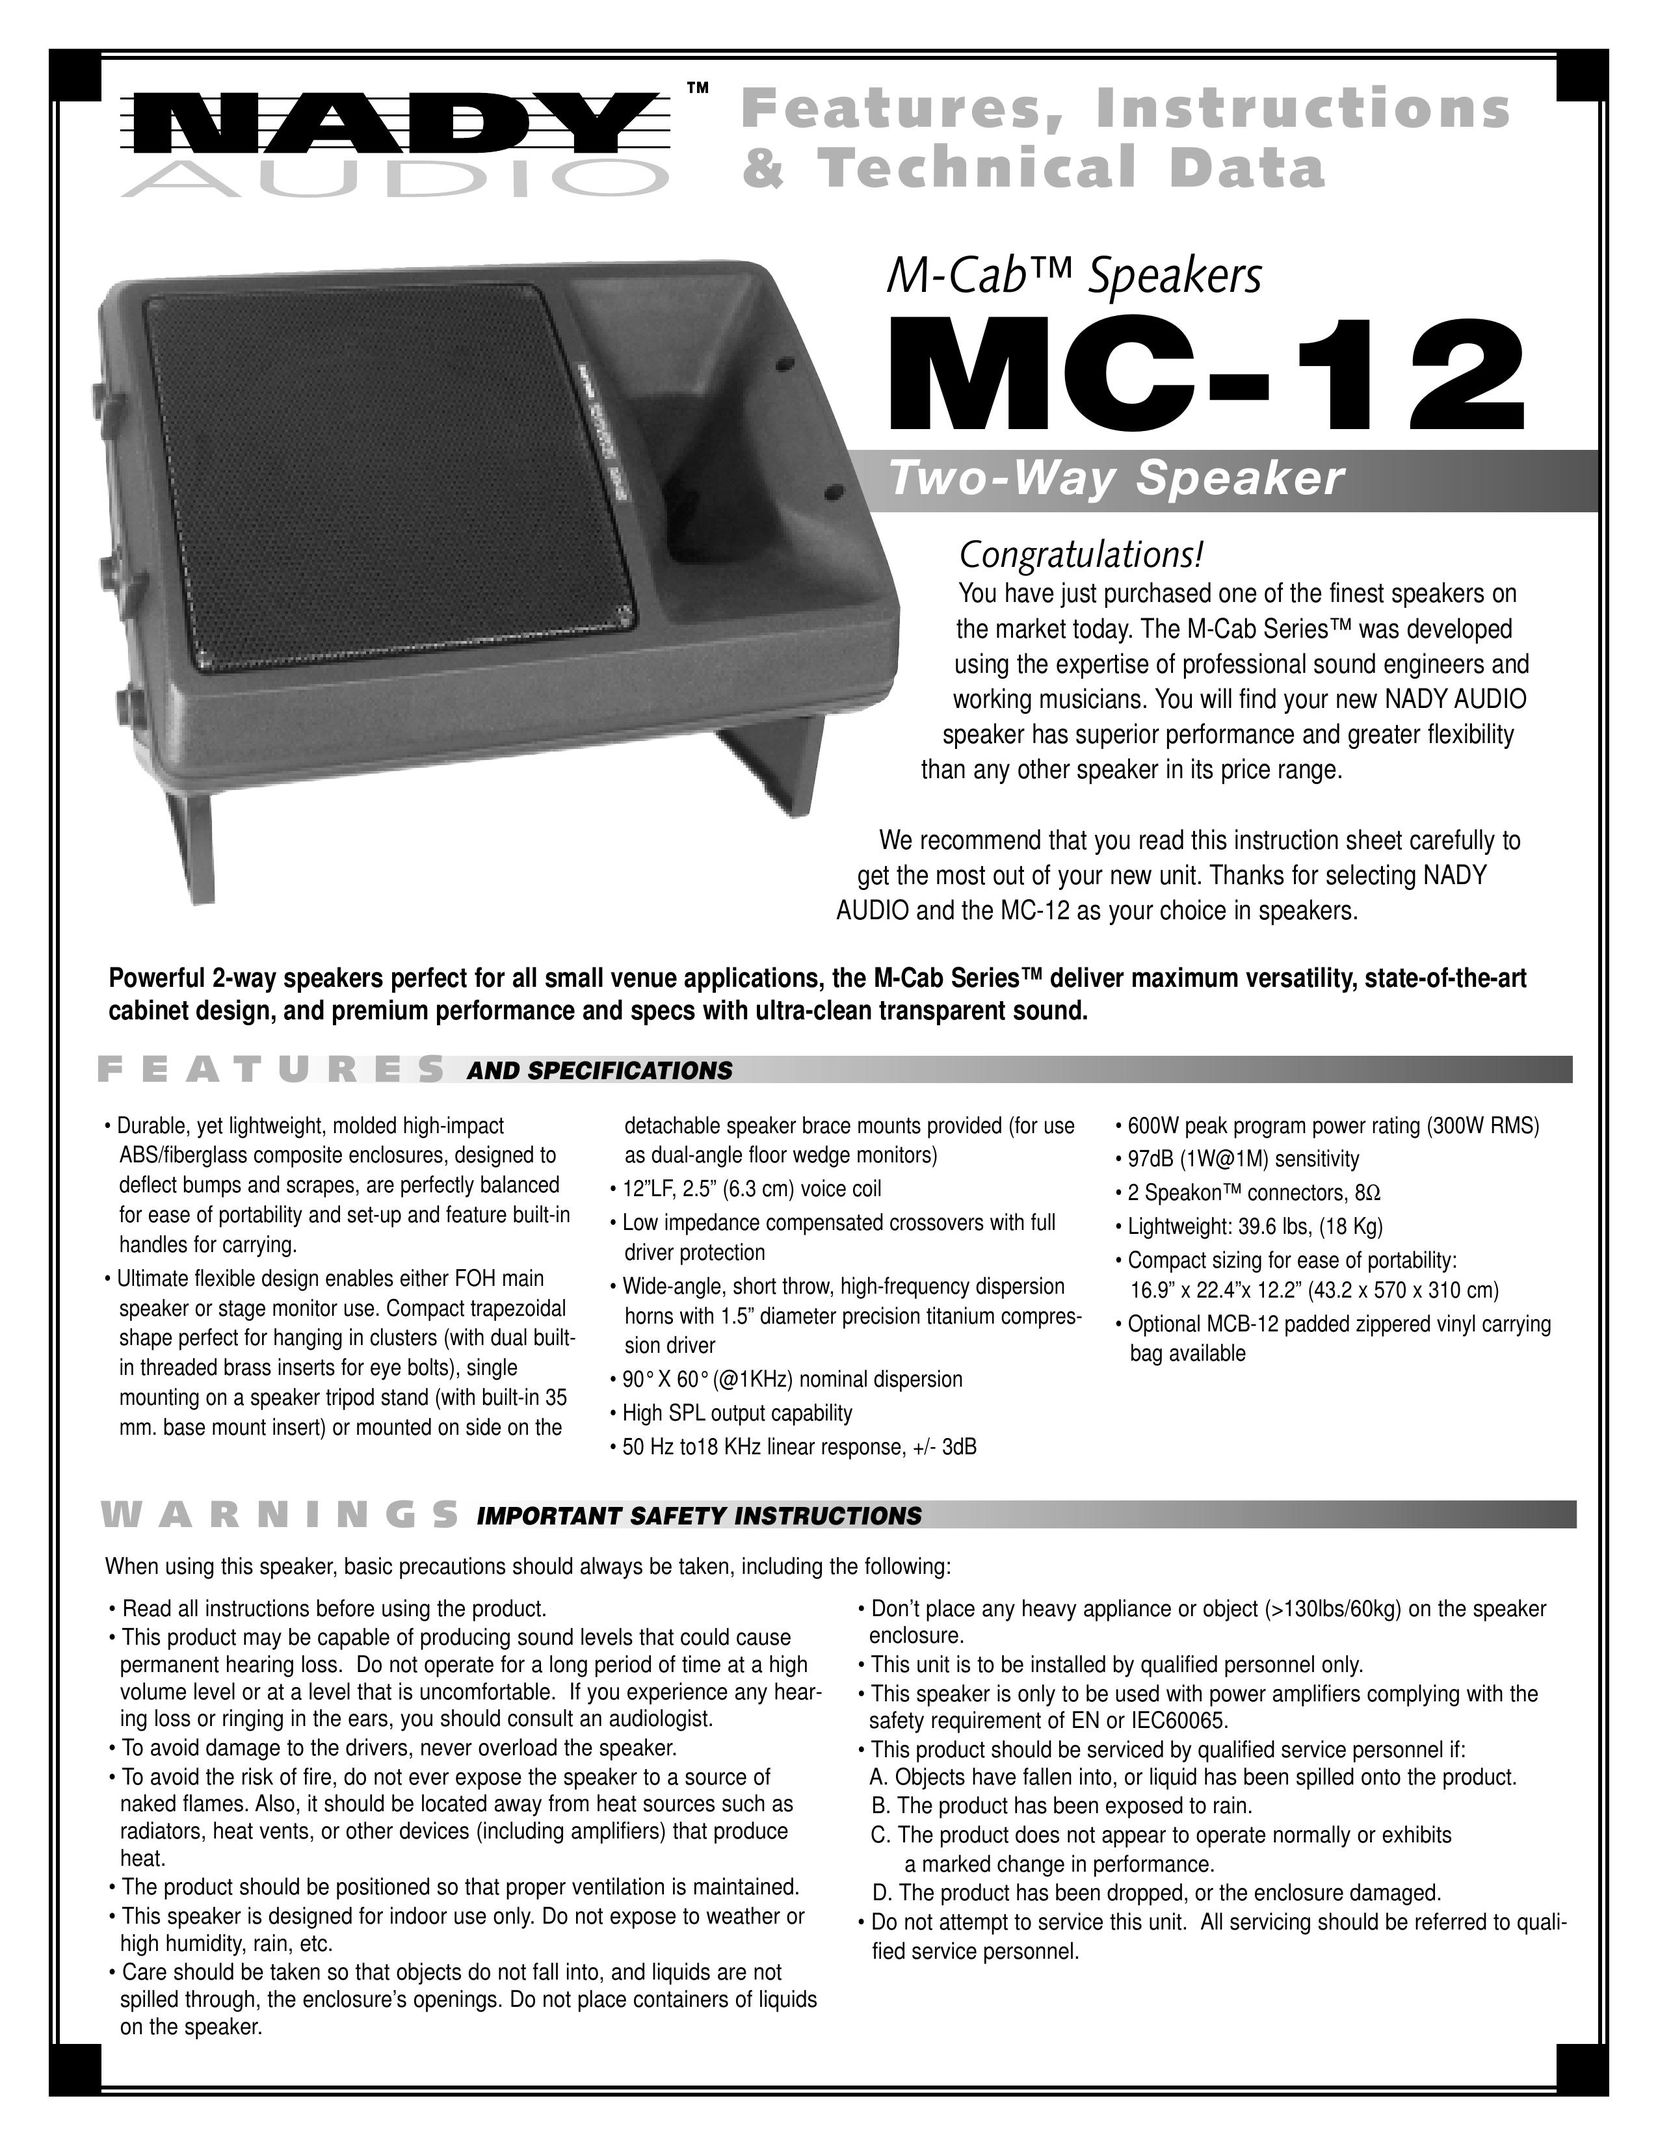 Nady Systems MC-12 Portable Speaker User Manual